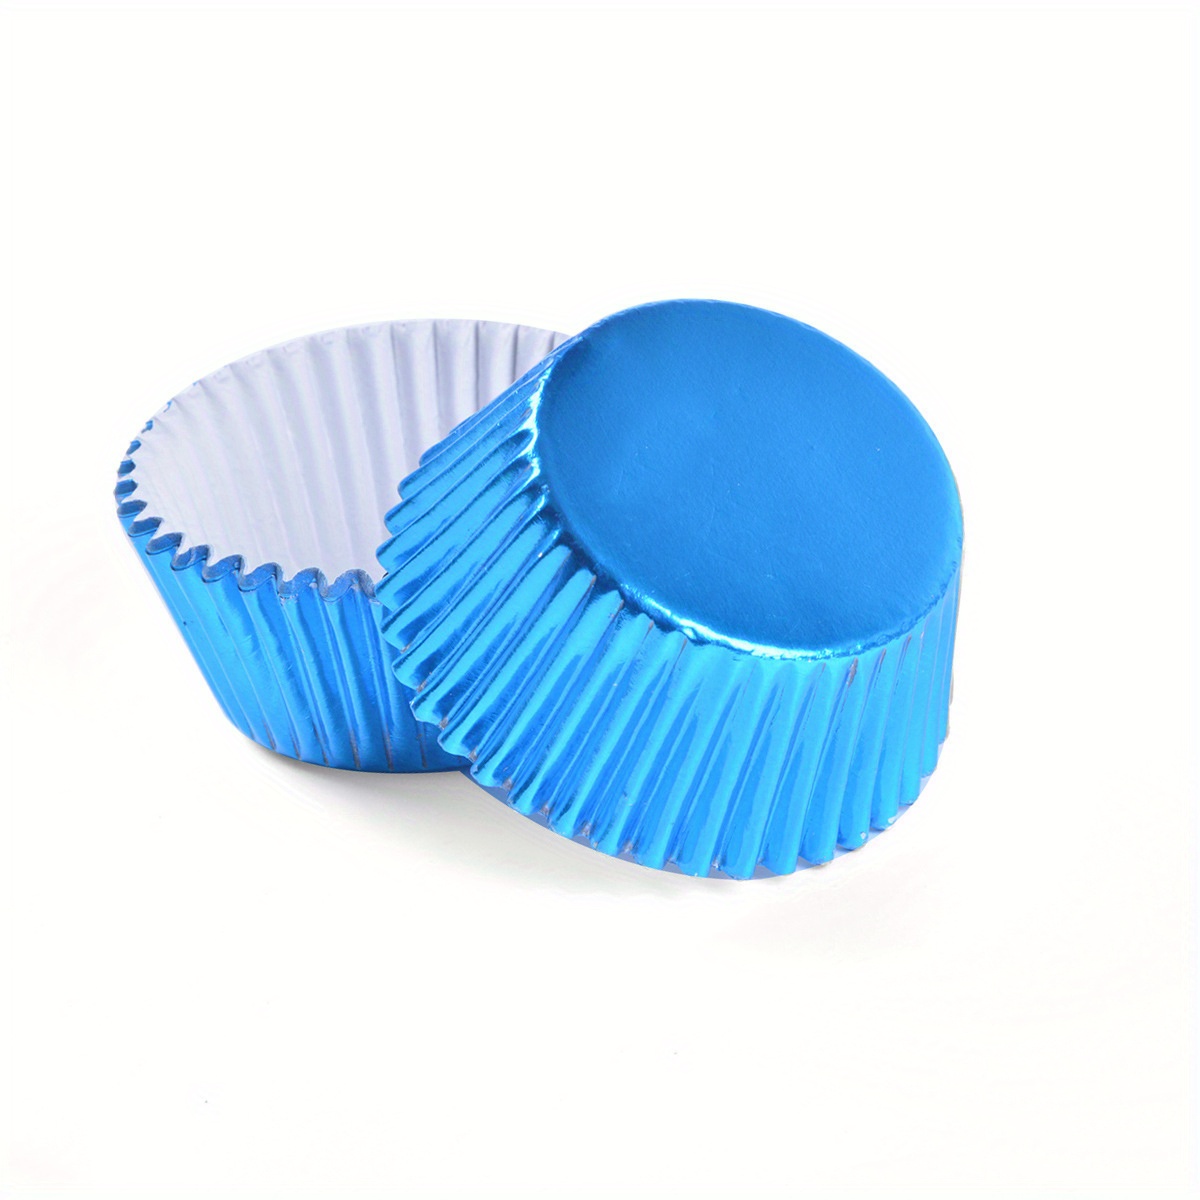 100pcs Blue Foil Cupcake Liners & Muffin Cups & Baking Cups For